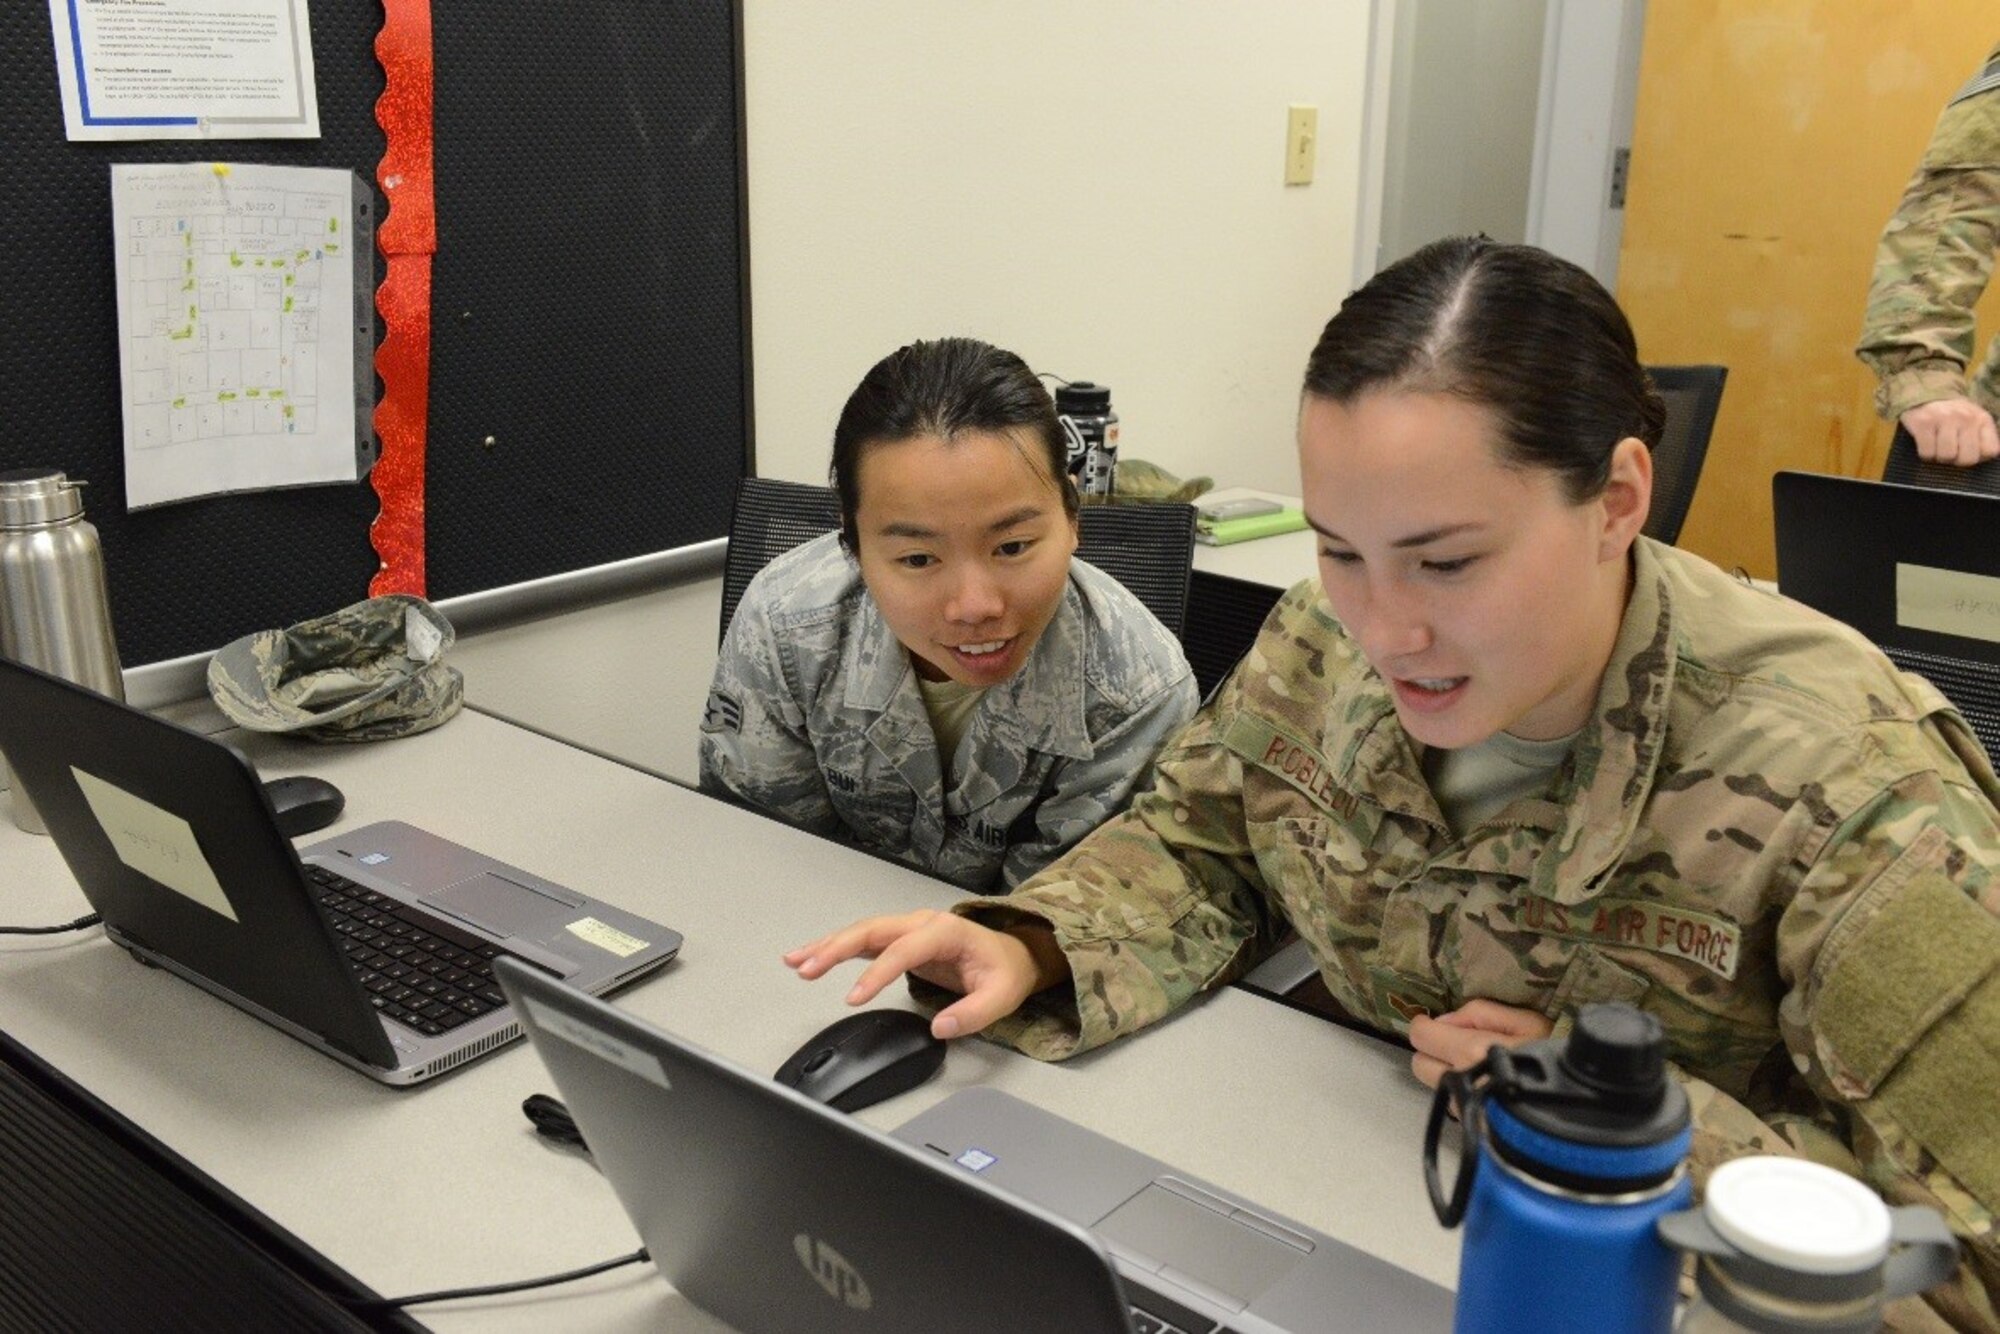 Staff Sgt. Ashlie Robledo and Senior Airman Thao Bui, 11th Special Operations Intelligence Squadron analysts, participate in a data-tagging training event Aug. 24, 2017, at Hurlburt Field, Fla. Data-tagging is designed to assist them with analyzing imagery. (U.S. Air Force photo by Senior Airman Lynette M. Rolen)